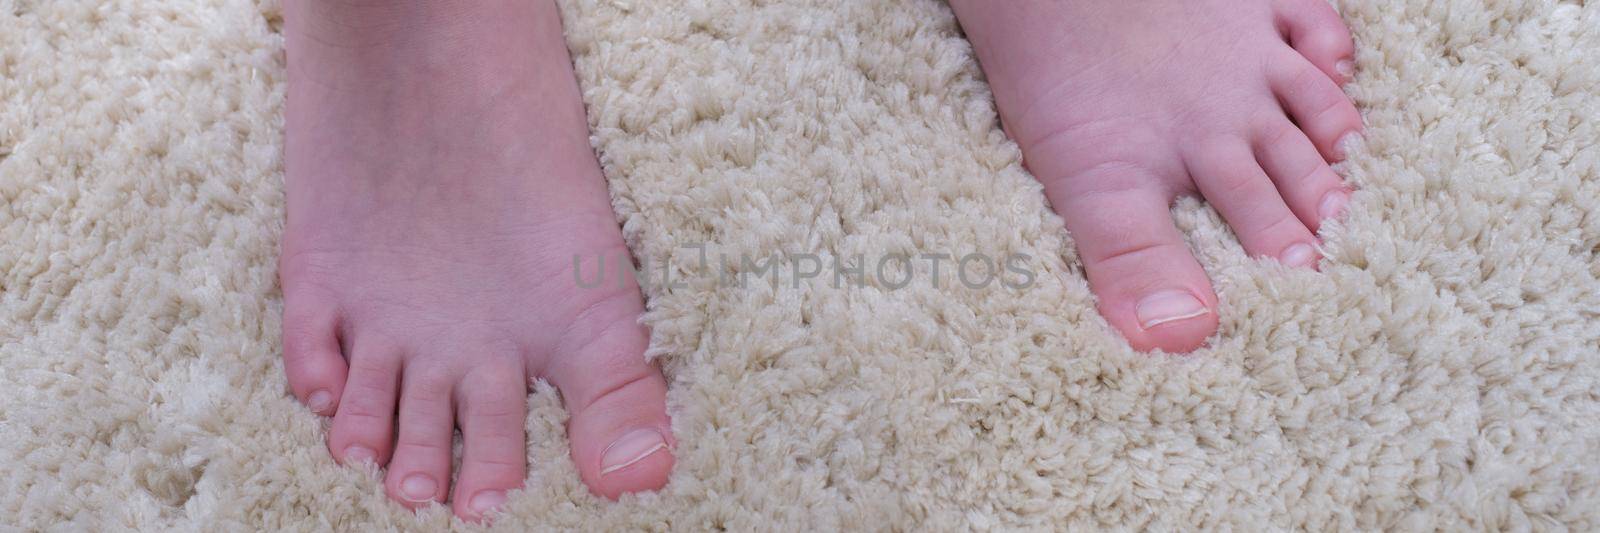 Bare feet of a man on a warm fluffy beige carpet by kuprevich